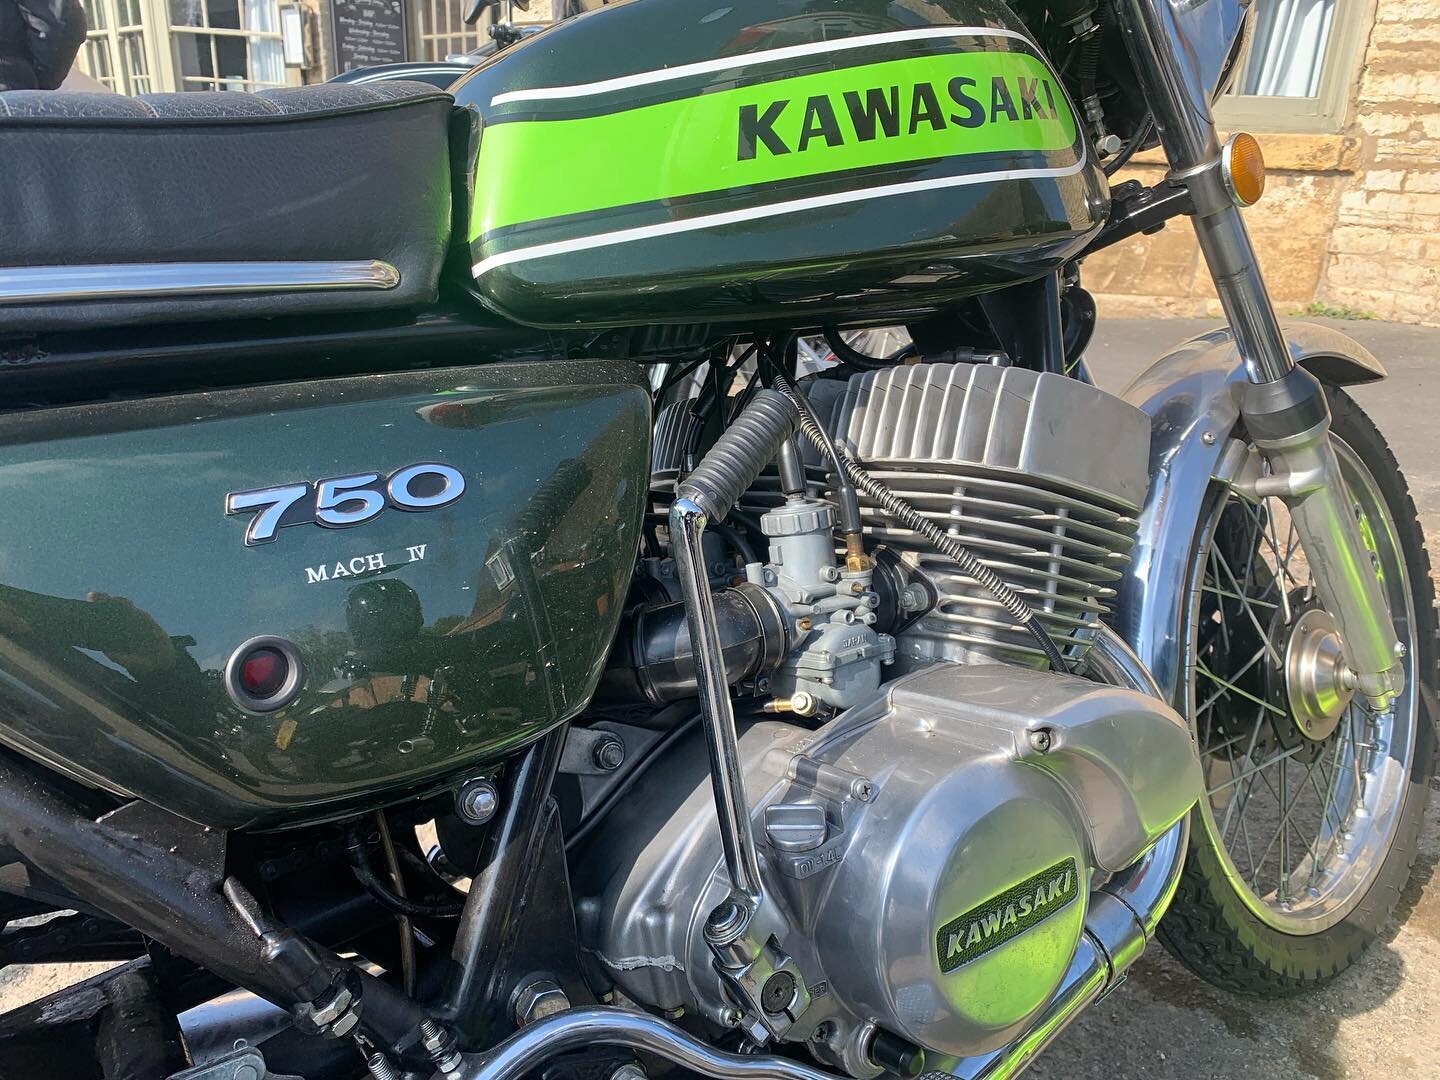 Kawasaki H2 Mach IV 750 on our run to the Super Sausage today. Great mix of bikes.  #vmcc #kawasaki #northcotswolds #2stroke #oldmotorcycle